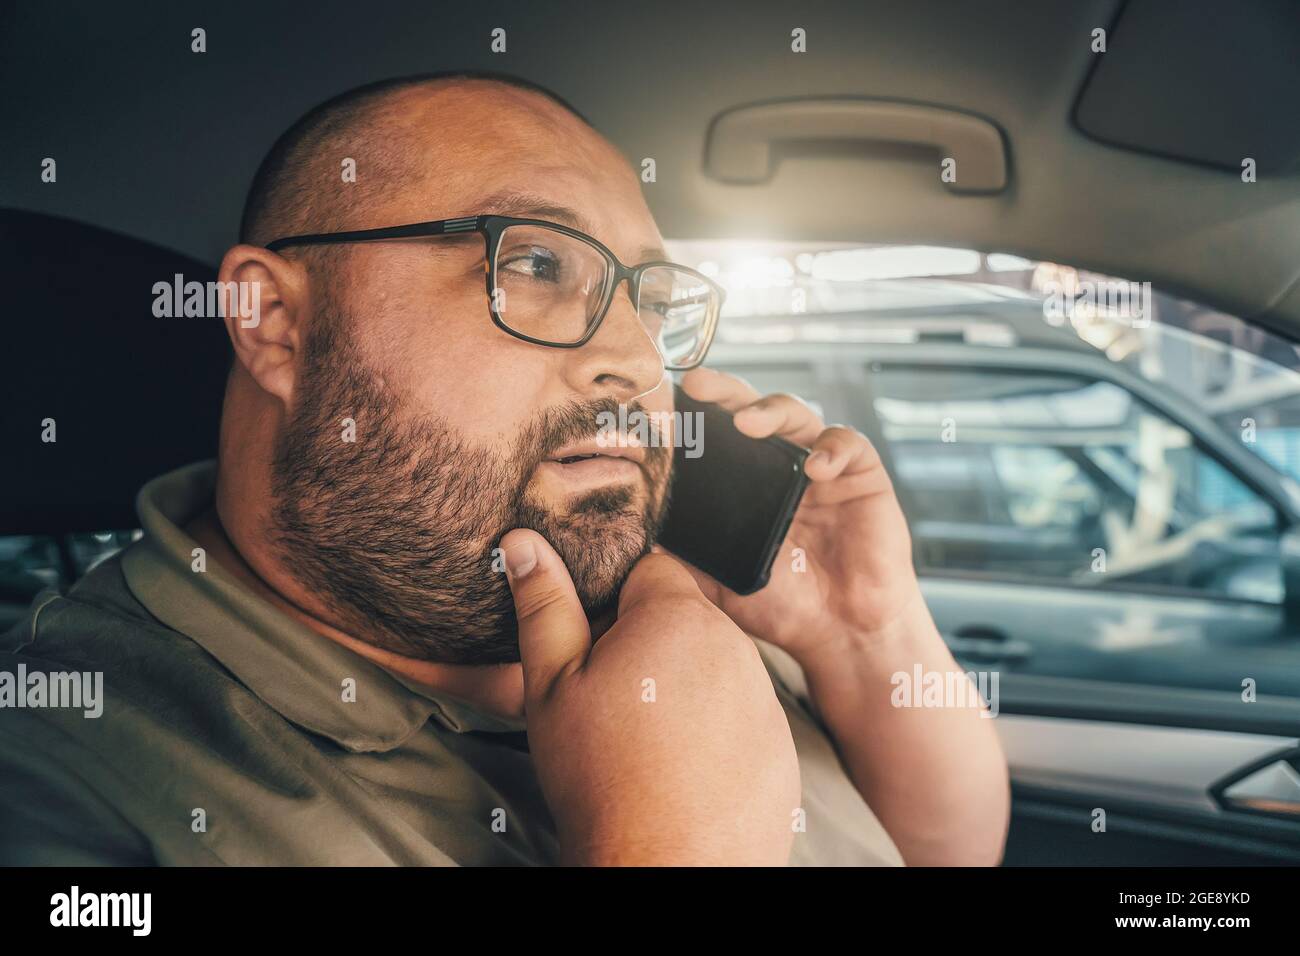 Puzzled man with glasses talking on phone while driving car. Emotion of doubt and distrust on face of funny fat man. Stock Photo